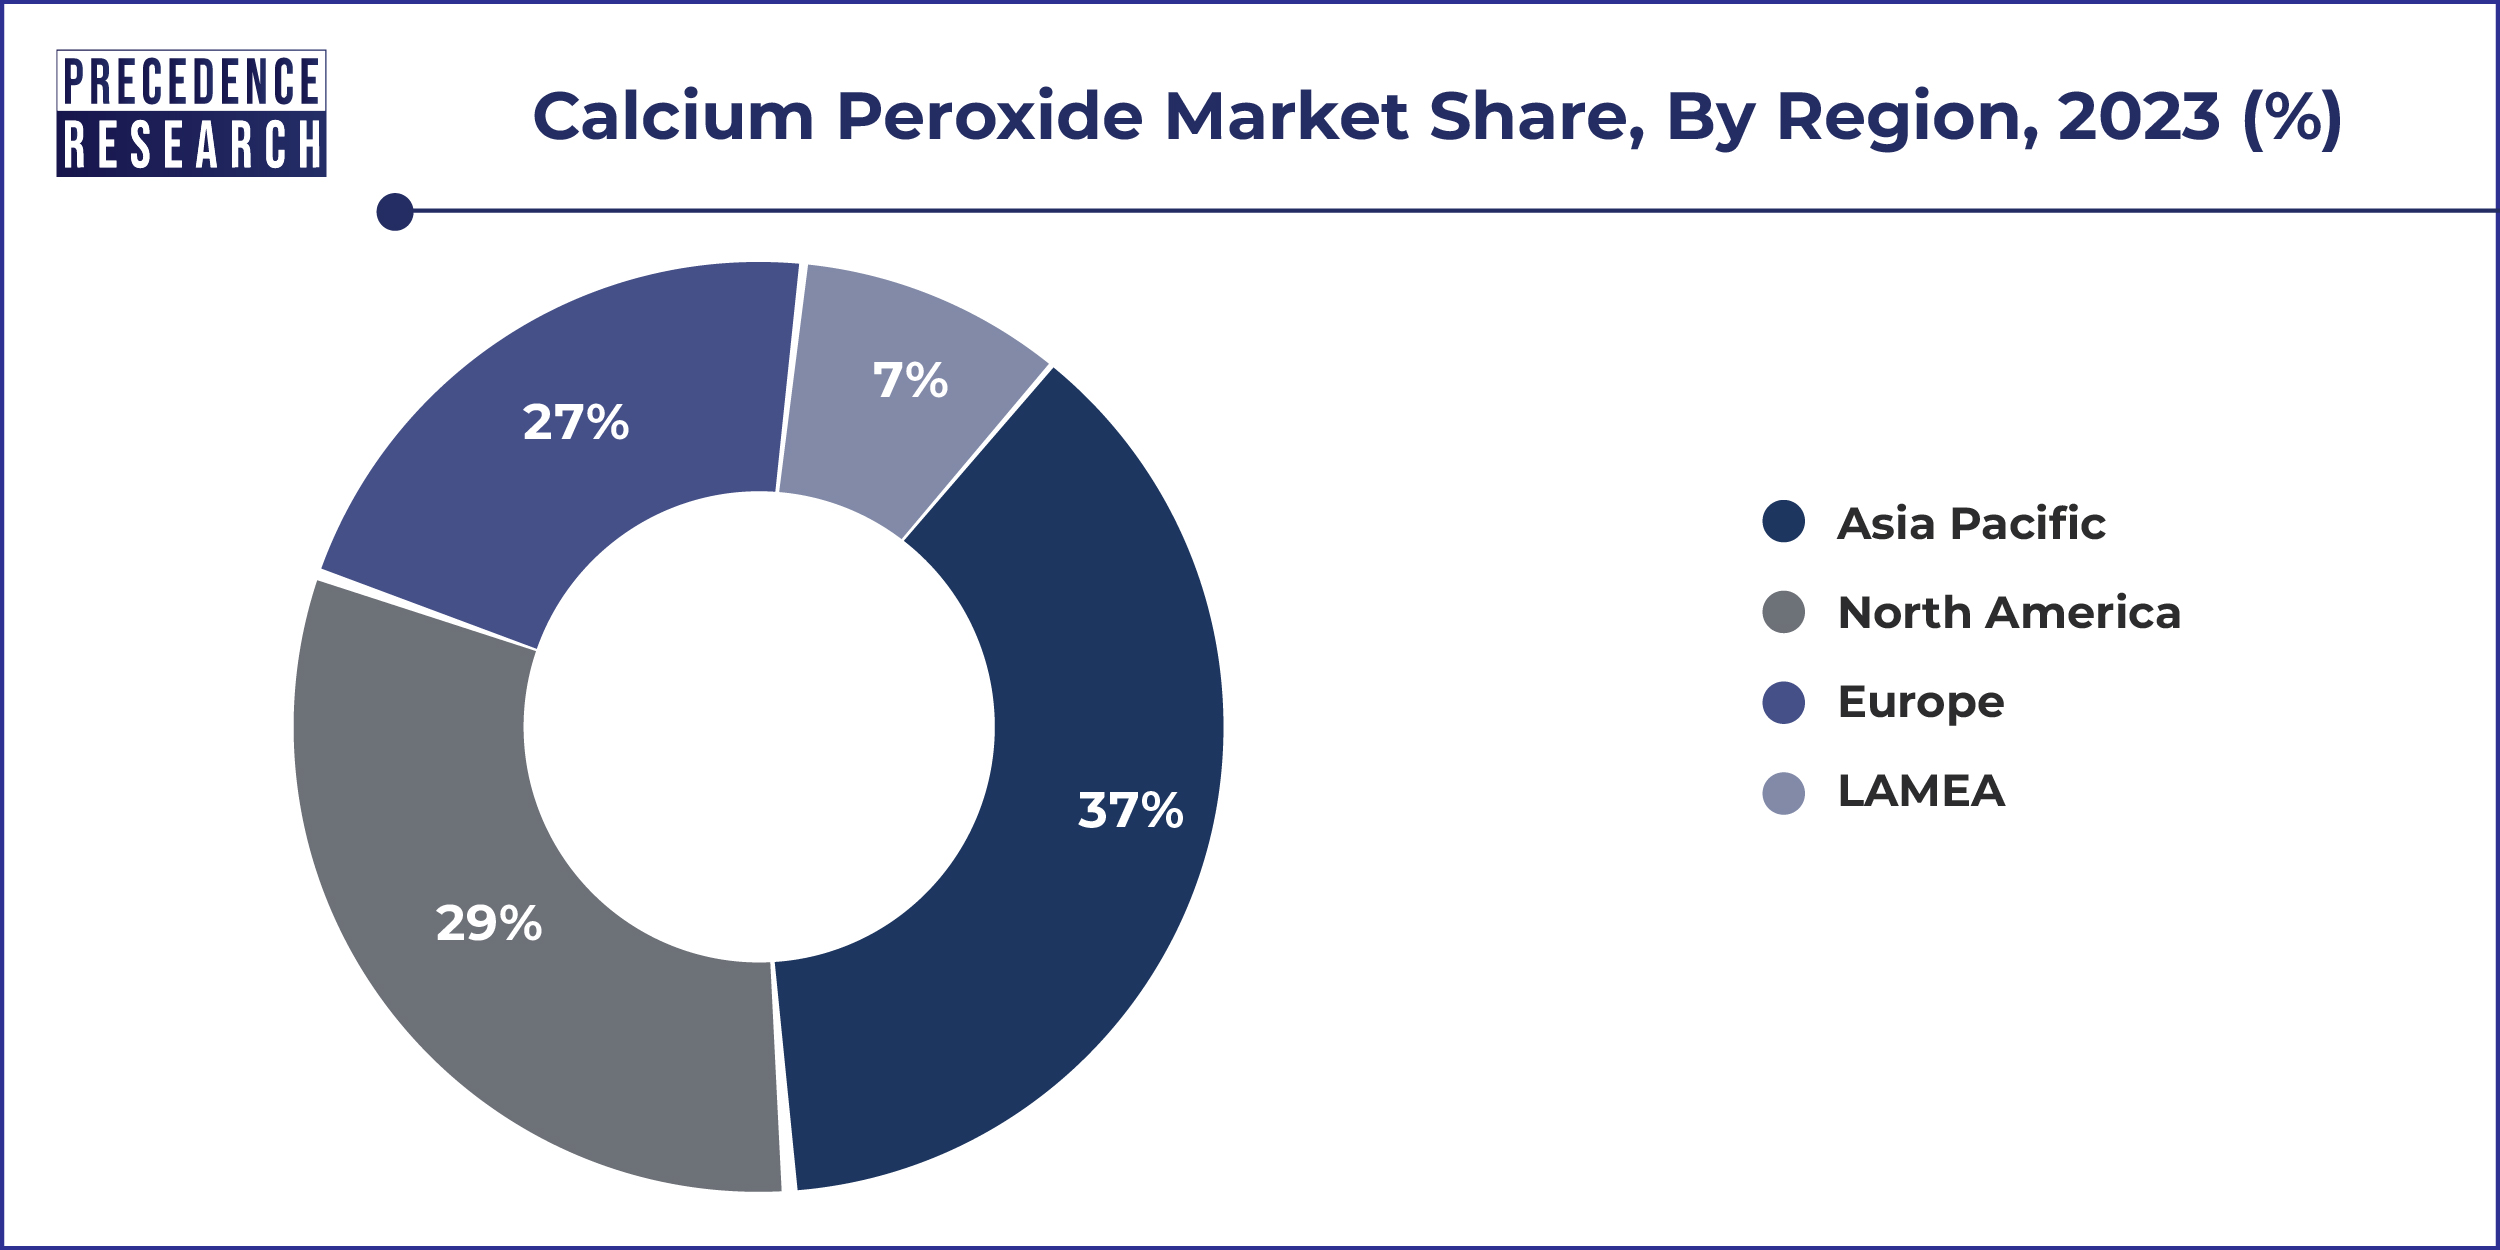 Calcium Peroxide Market Share, By Region, 2023 (%)